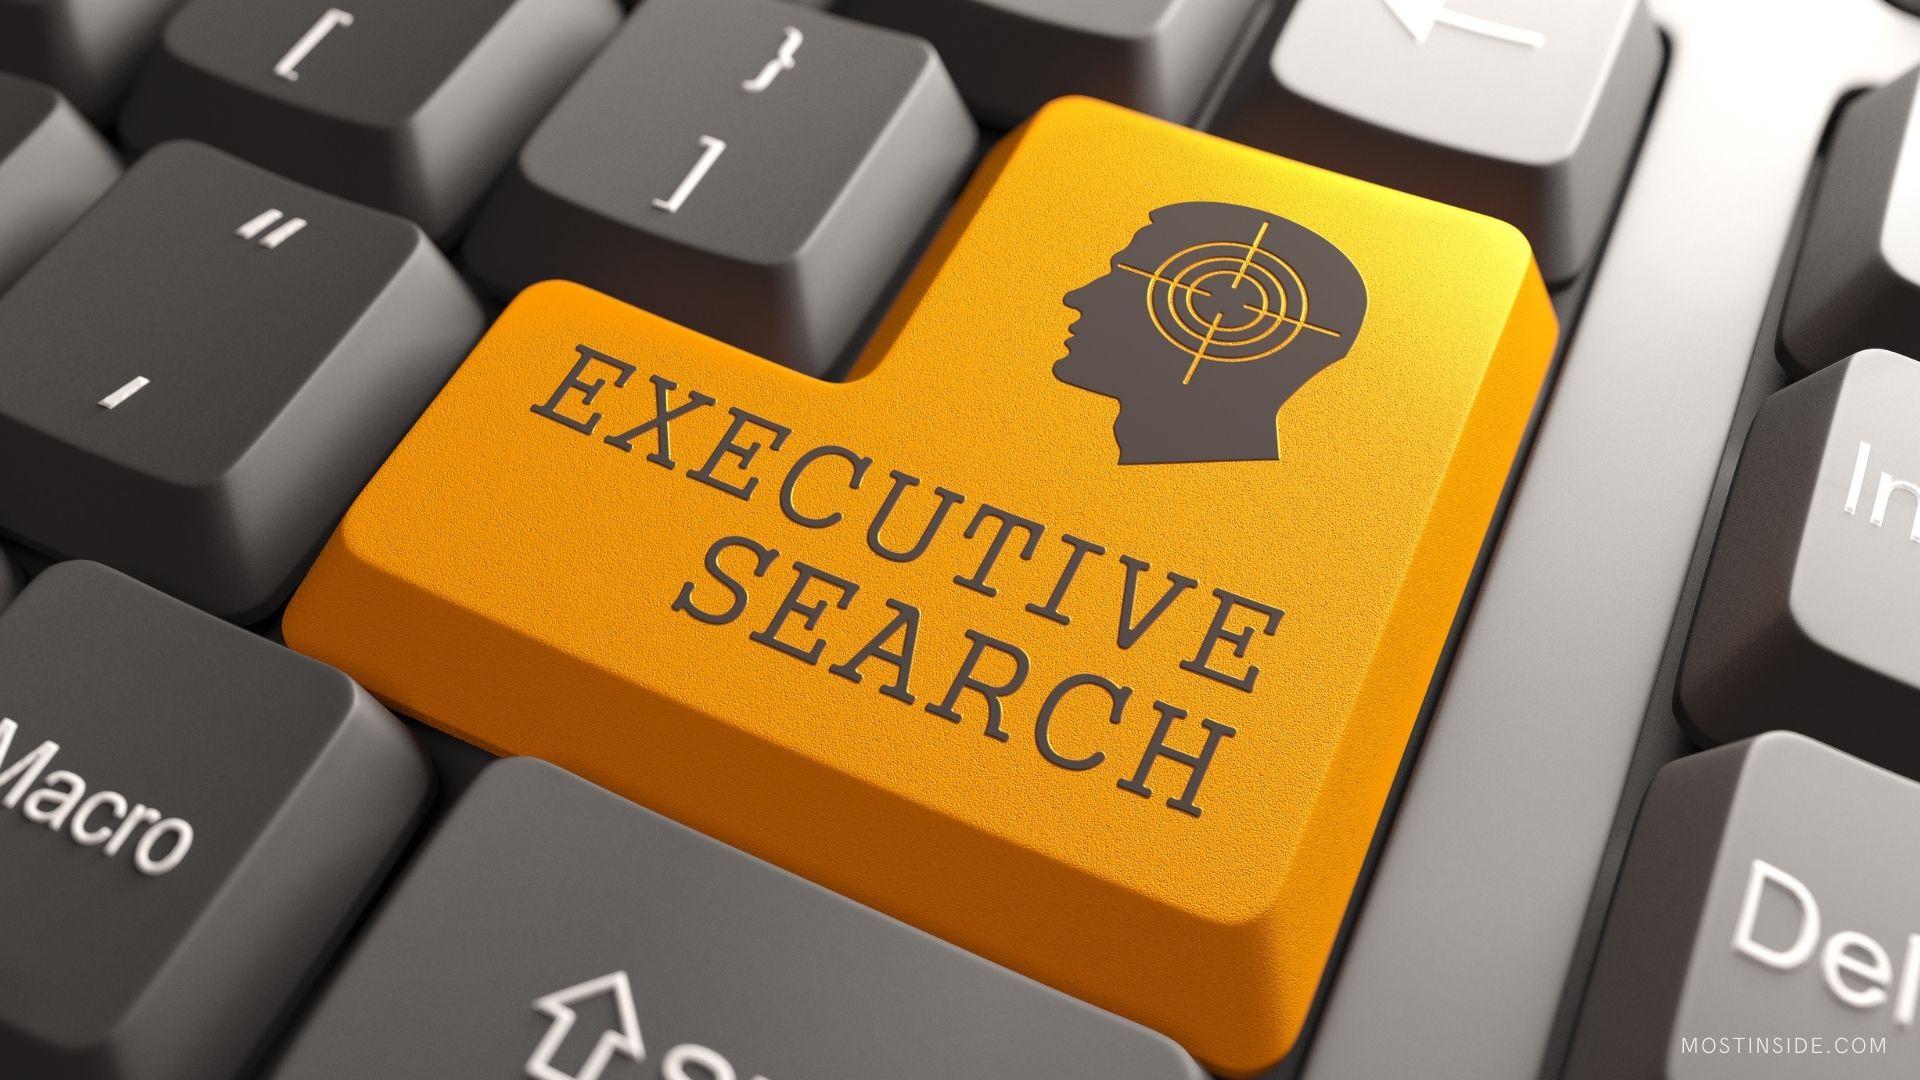 Executive Search Firm